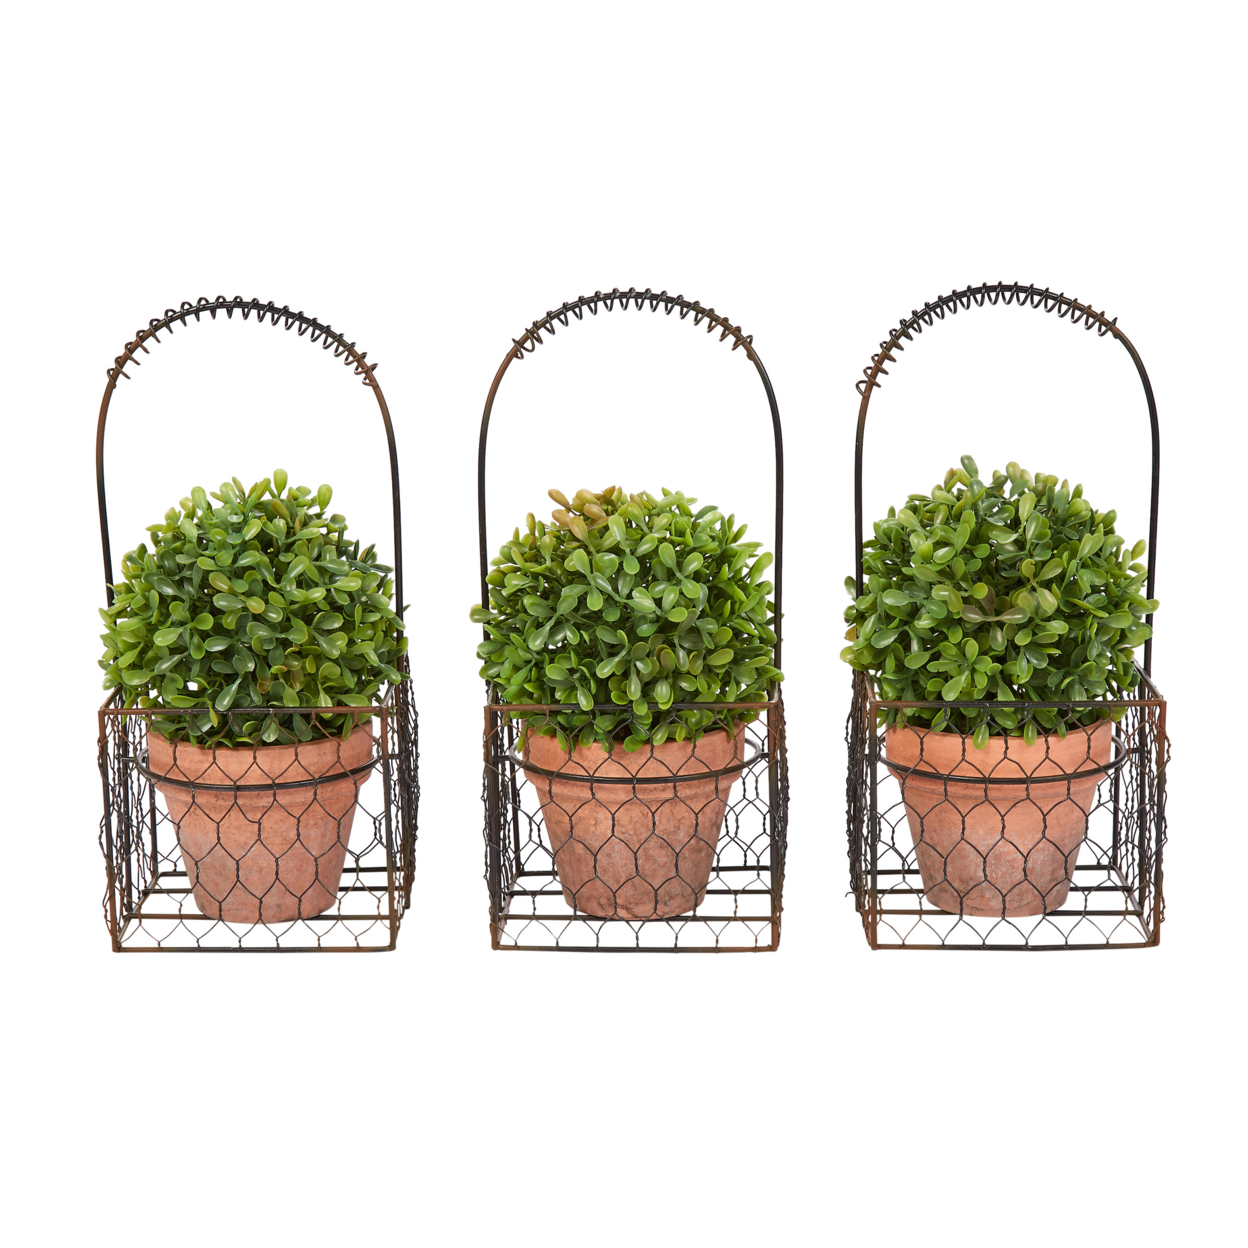 Faux Boxwood 3 Matching Realistic 9.5 Inch Tall Topiary Arrangements In Decorative Metal Baskets (Set Of 3)